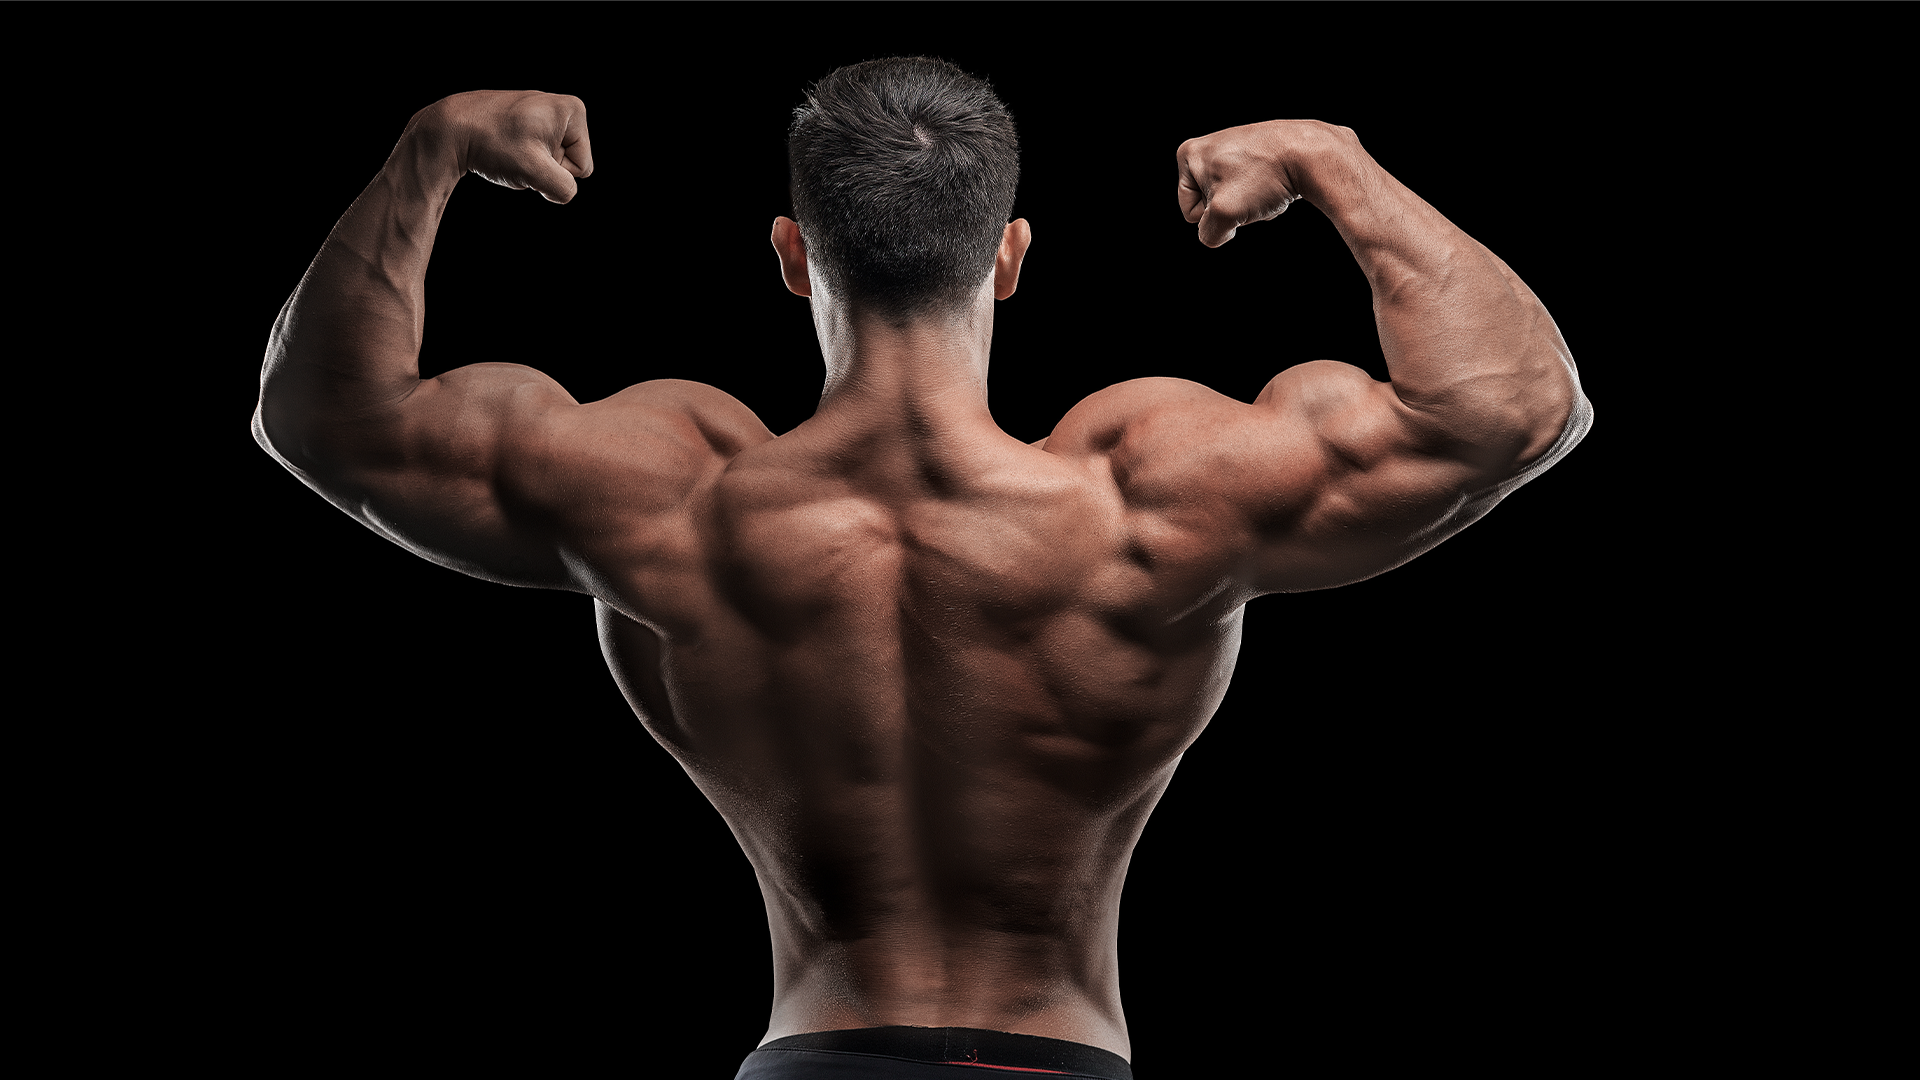 Bulking vs. Cutting: What is the Difference? (And Which to Do?) – CrazyBulk  USA